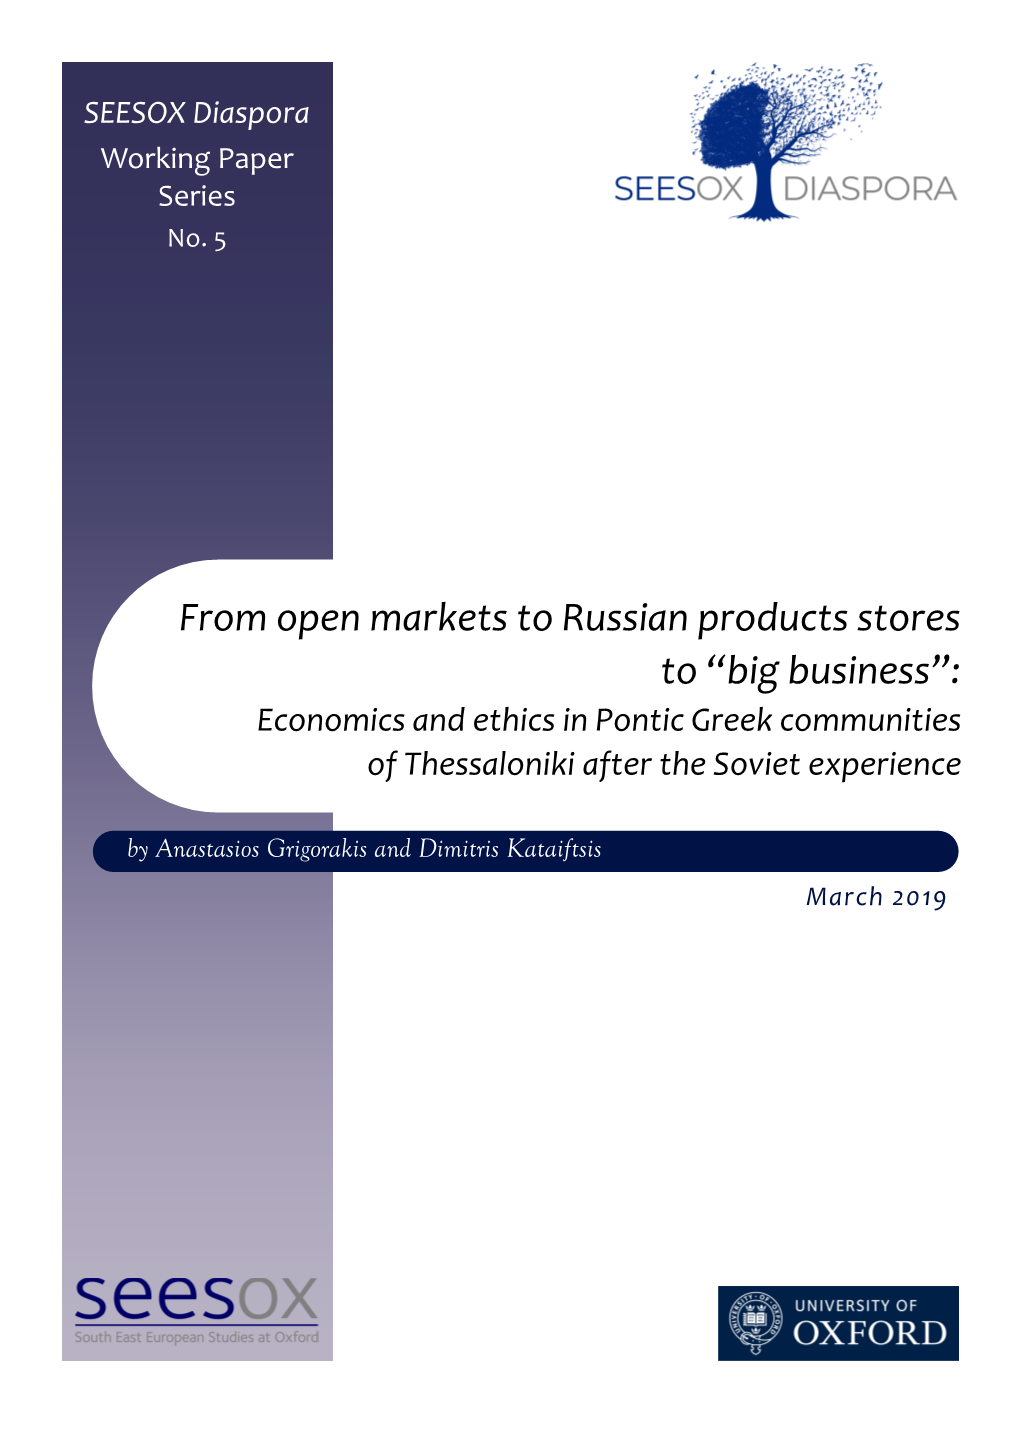 From Open Markets to Russian Products Stores to “Big Business”: Economics and Ethics in Pontic Greek Communities of Thessaloniki After the Soviet Experience